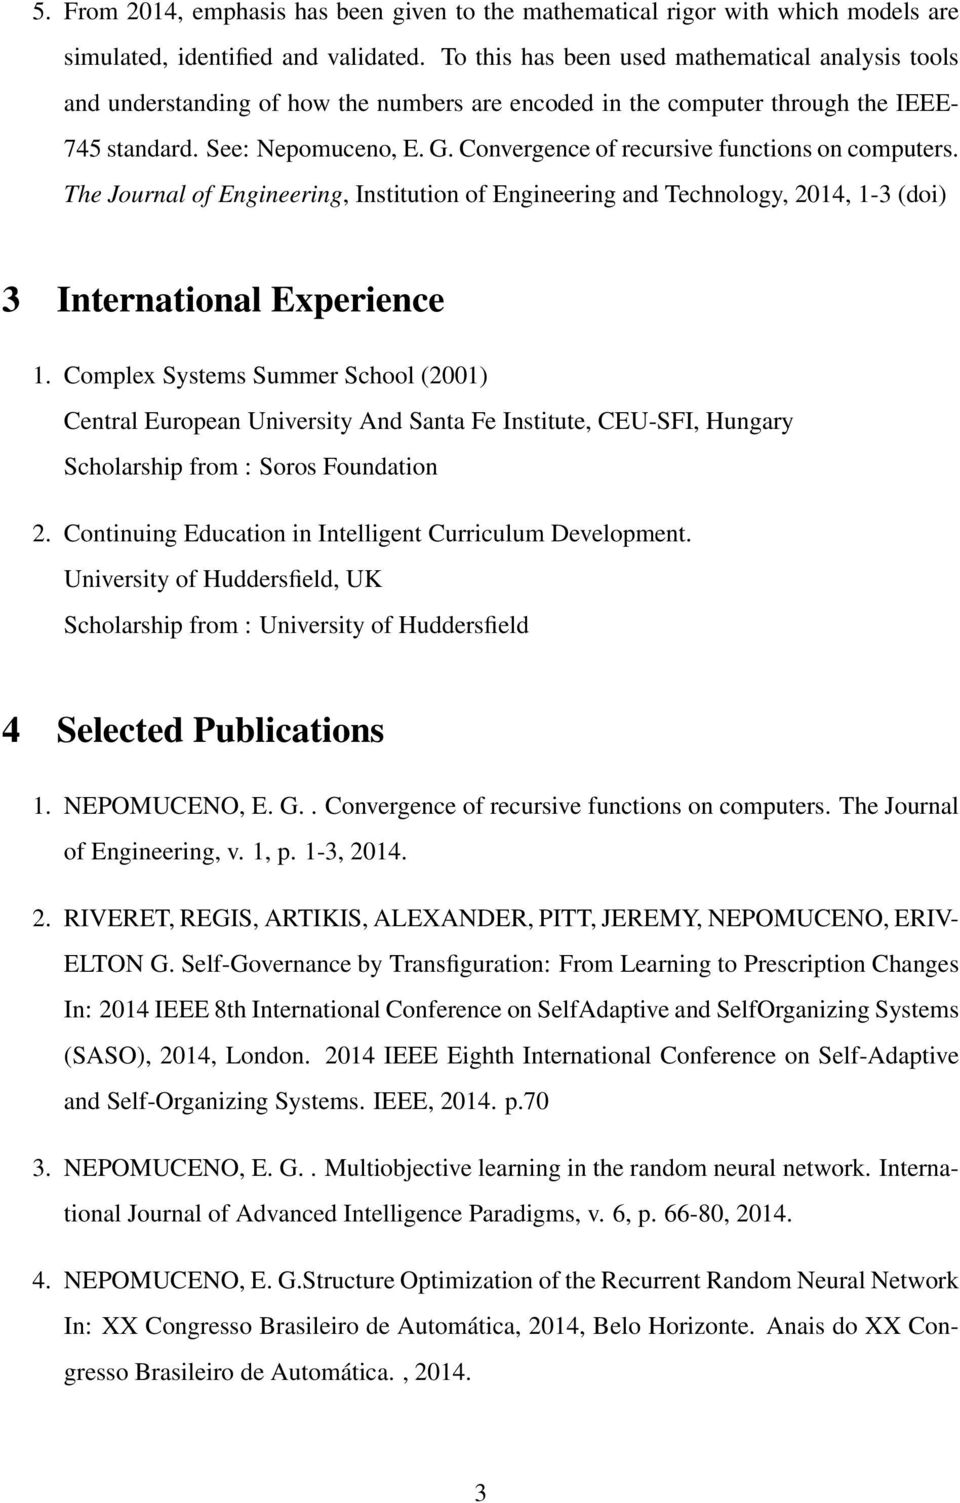 Convergence of recursive functions on computers. The Journal of Engineering, Institution of Engineering and Technology, 2014, 1-3 (doi) 3 International Experience 1.